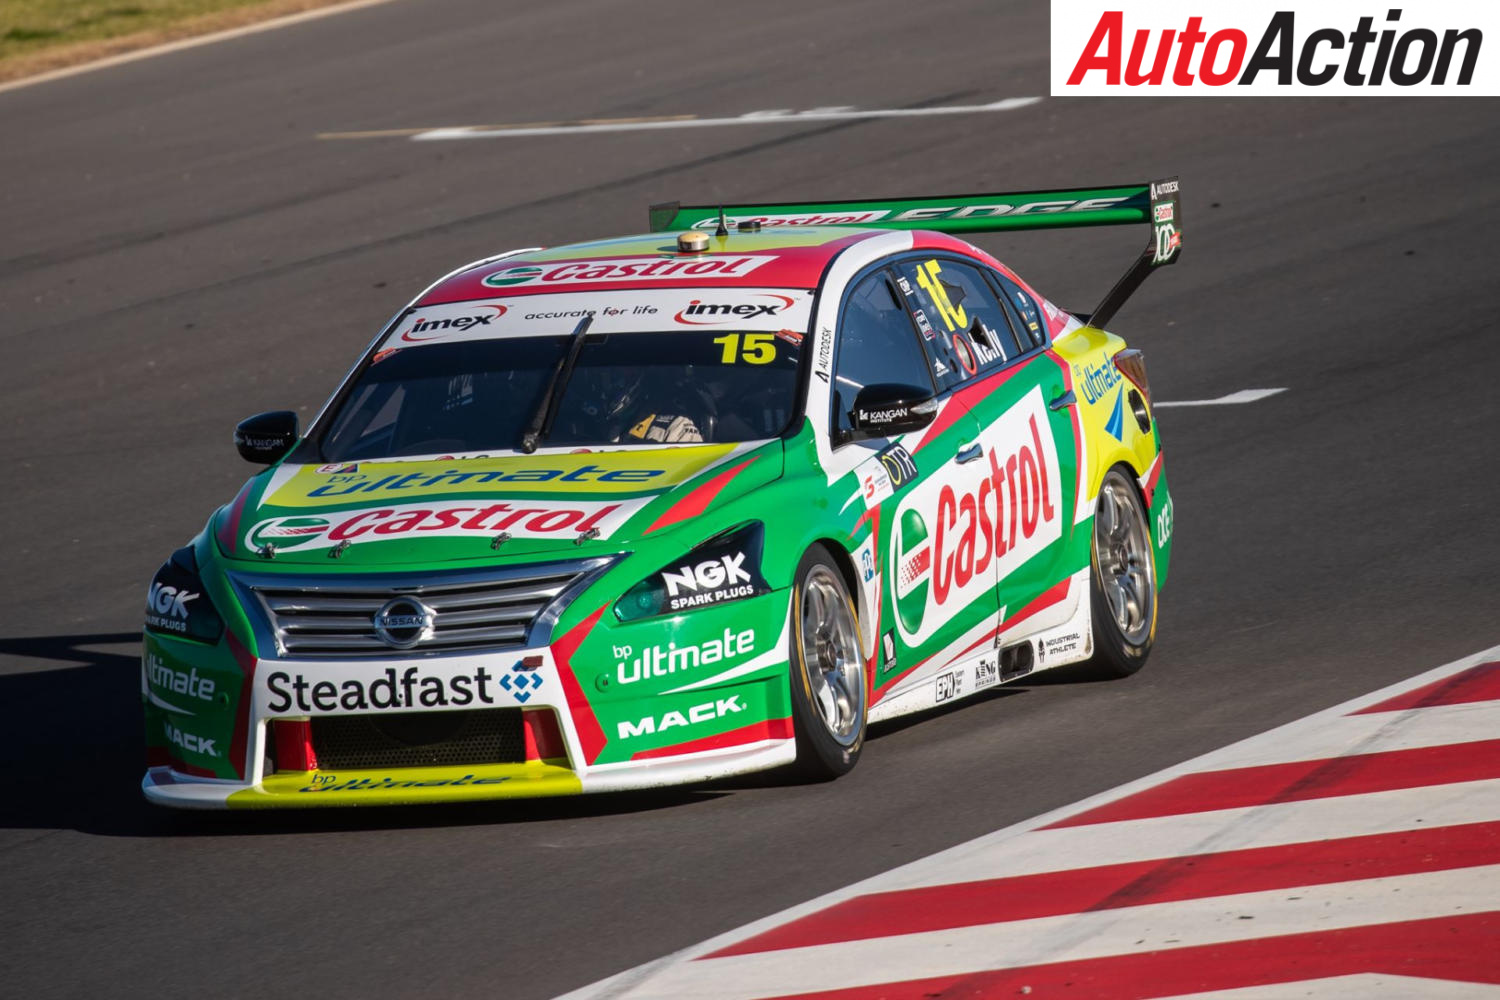 Further Aero amendments in the lead up to Bathurst - Photo: InSyde Media